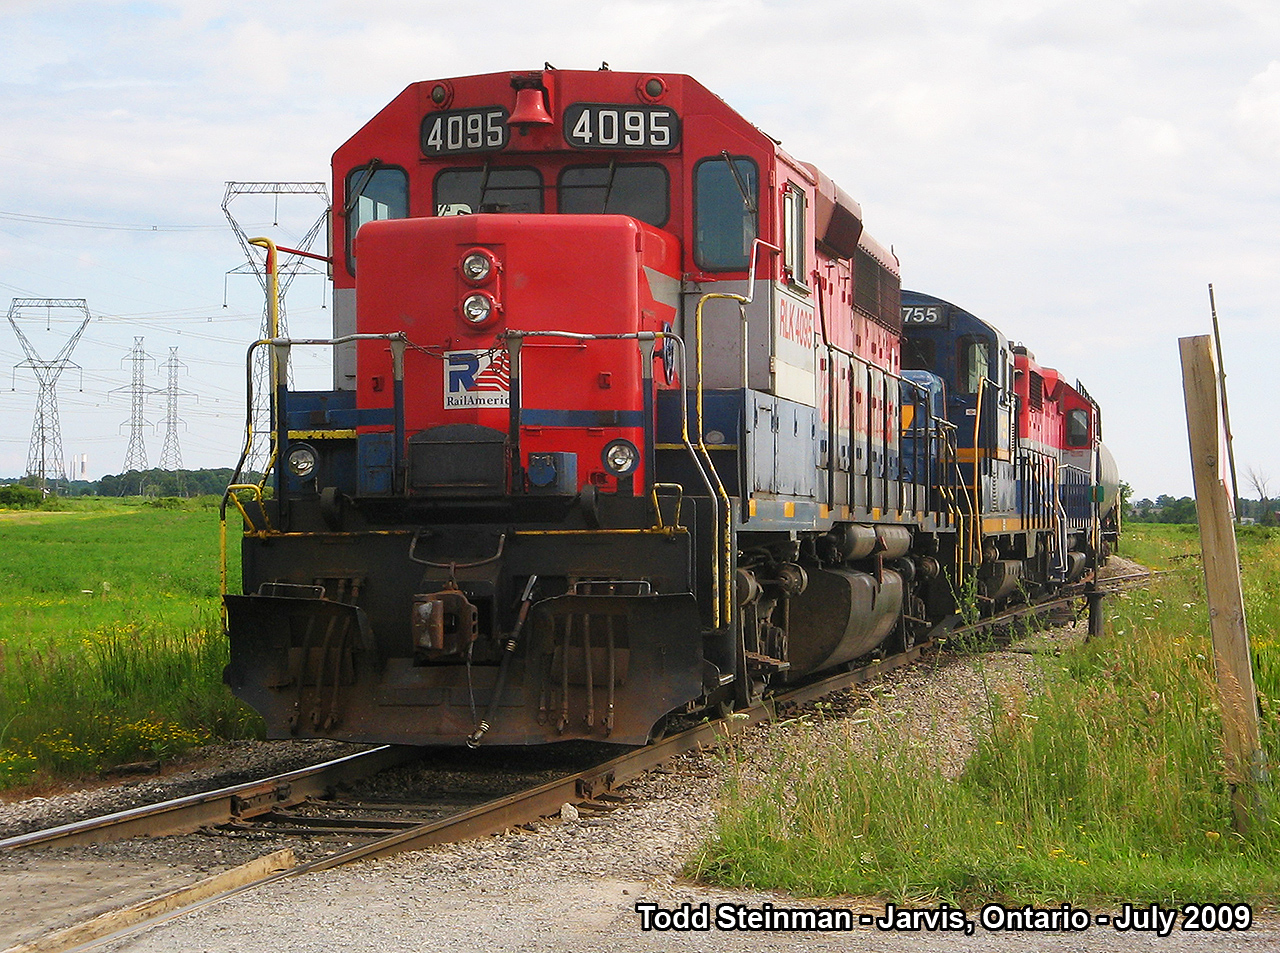 There is nothing like a country drive. On this July evening, I went to what I once considered one of my favourite spots to railfan in Haldimand County. Here, RailLink (Rail America) 4095, 1755 and an unidentifiable third engine are tied down for the night with a string of tanker cars. This became known as 'Garnet' for the railway - after the 'realignment' was built (mid 70's) to not only serve the Imperial Oil Refinery, but to the Ontario Power Generation plant in Nanticoke as well. Just off to the left remains a switch that was part of the interchange with the Air Line that ran through Jarvis, where only a spur remains today to store excess tanker cars bound to and from Imperial Oil. 
Much has changed since this photo was taken outside of Jarvis at the Concession 8 Walpole crossing. Upgrades by the Southern Ontario Railway have led to a couple of extra tracks built in the yard, as well as upgrades to their security. It was their security that asked me to leave the premises for good approx. 2 years ago, as they thought I was photographing for 'unwelcome' circumstances.